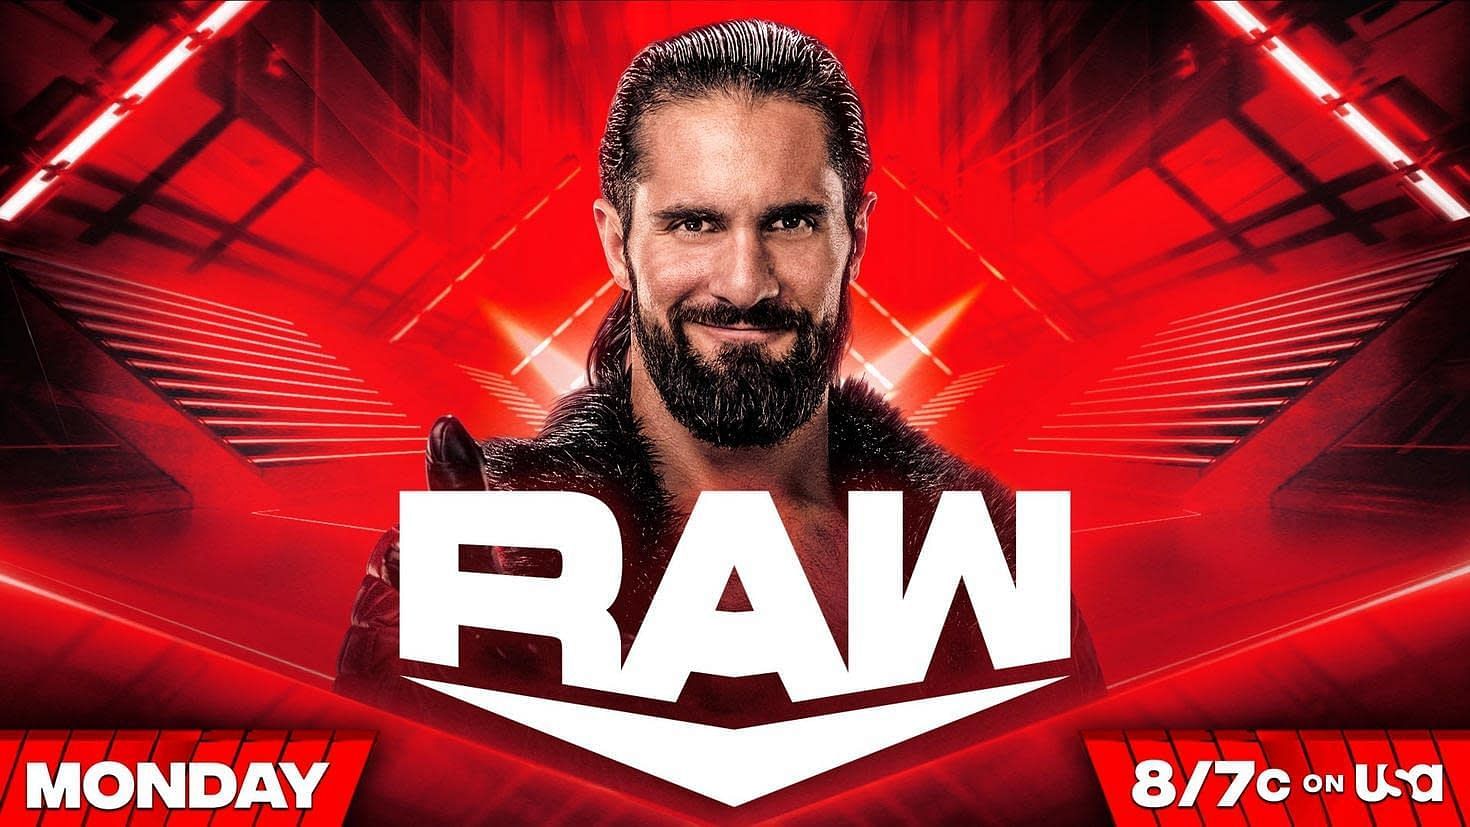 What will Seth Rollins say on RAW?